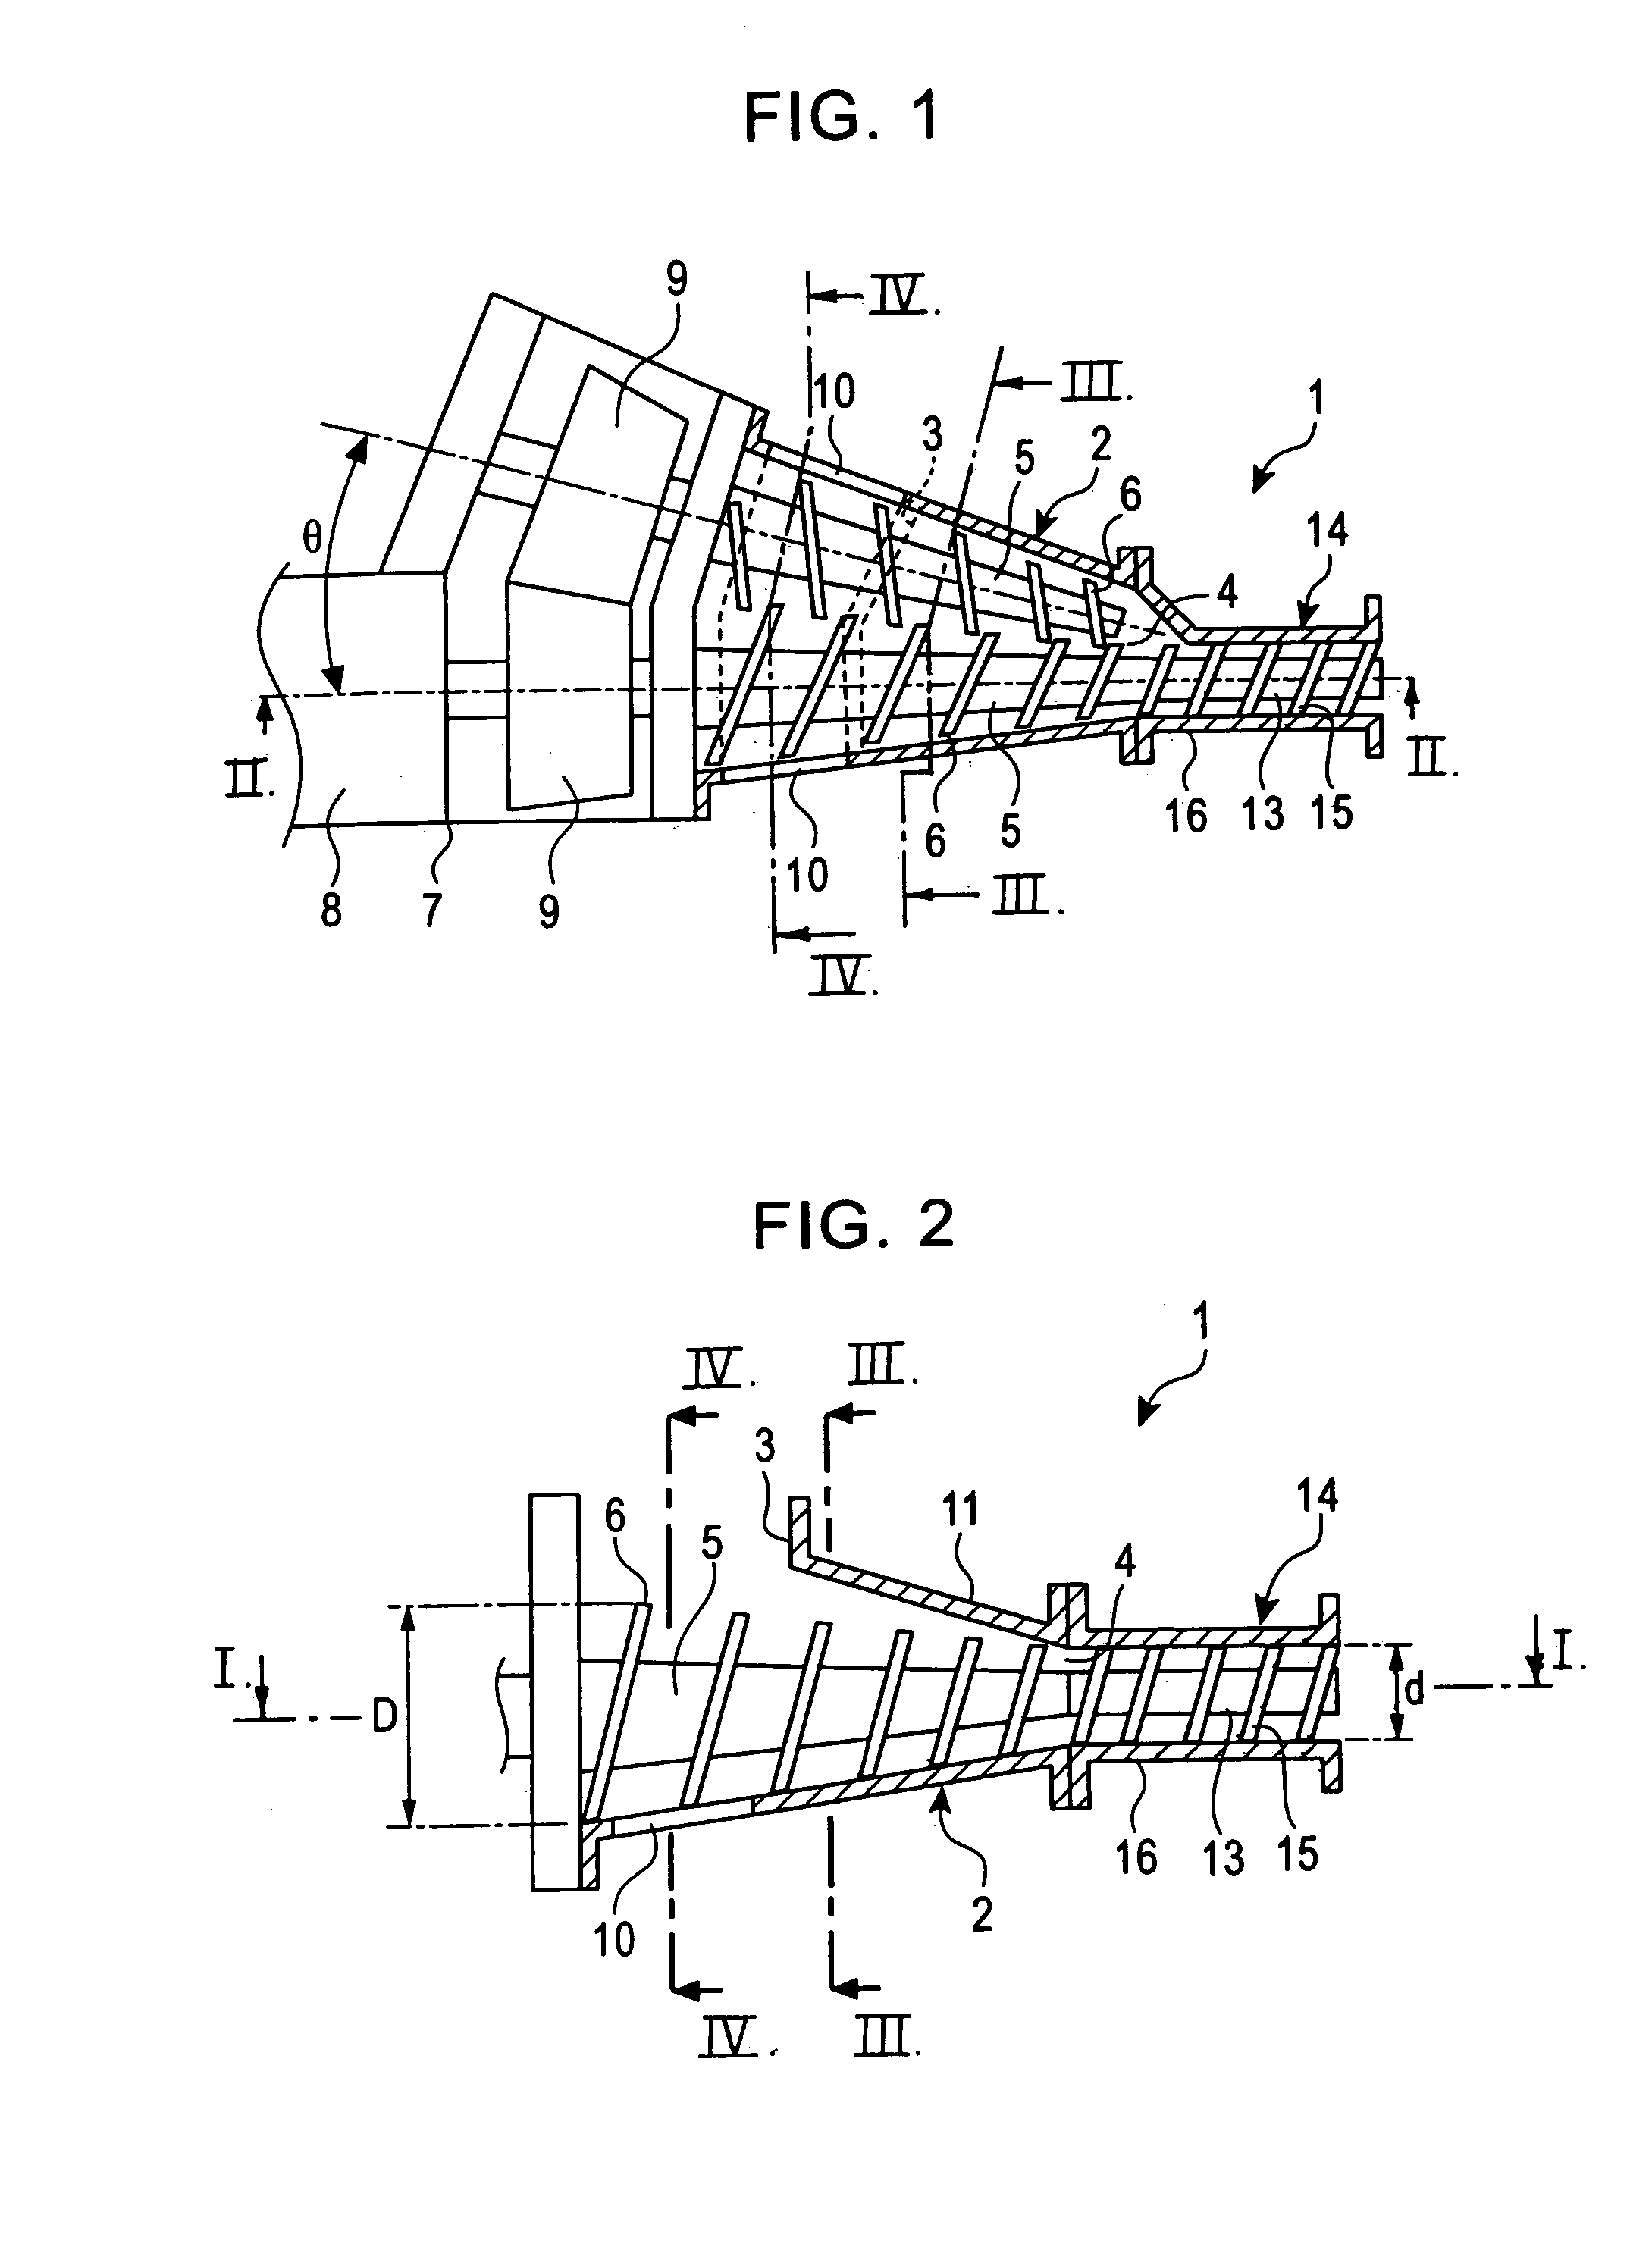 Conical twin-screw extruder and dehydrator